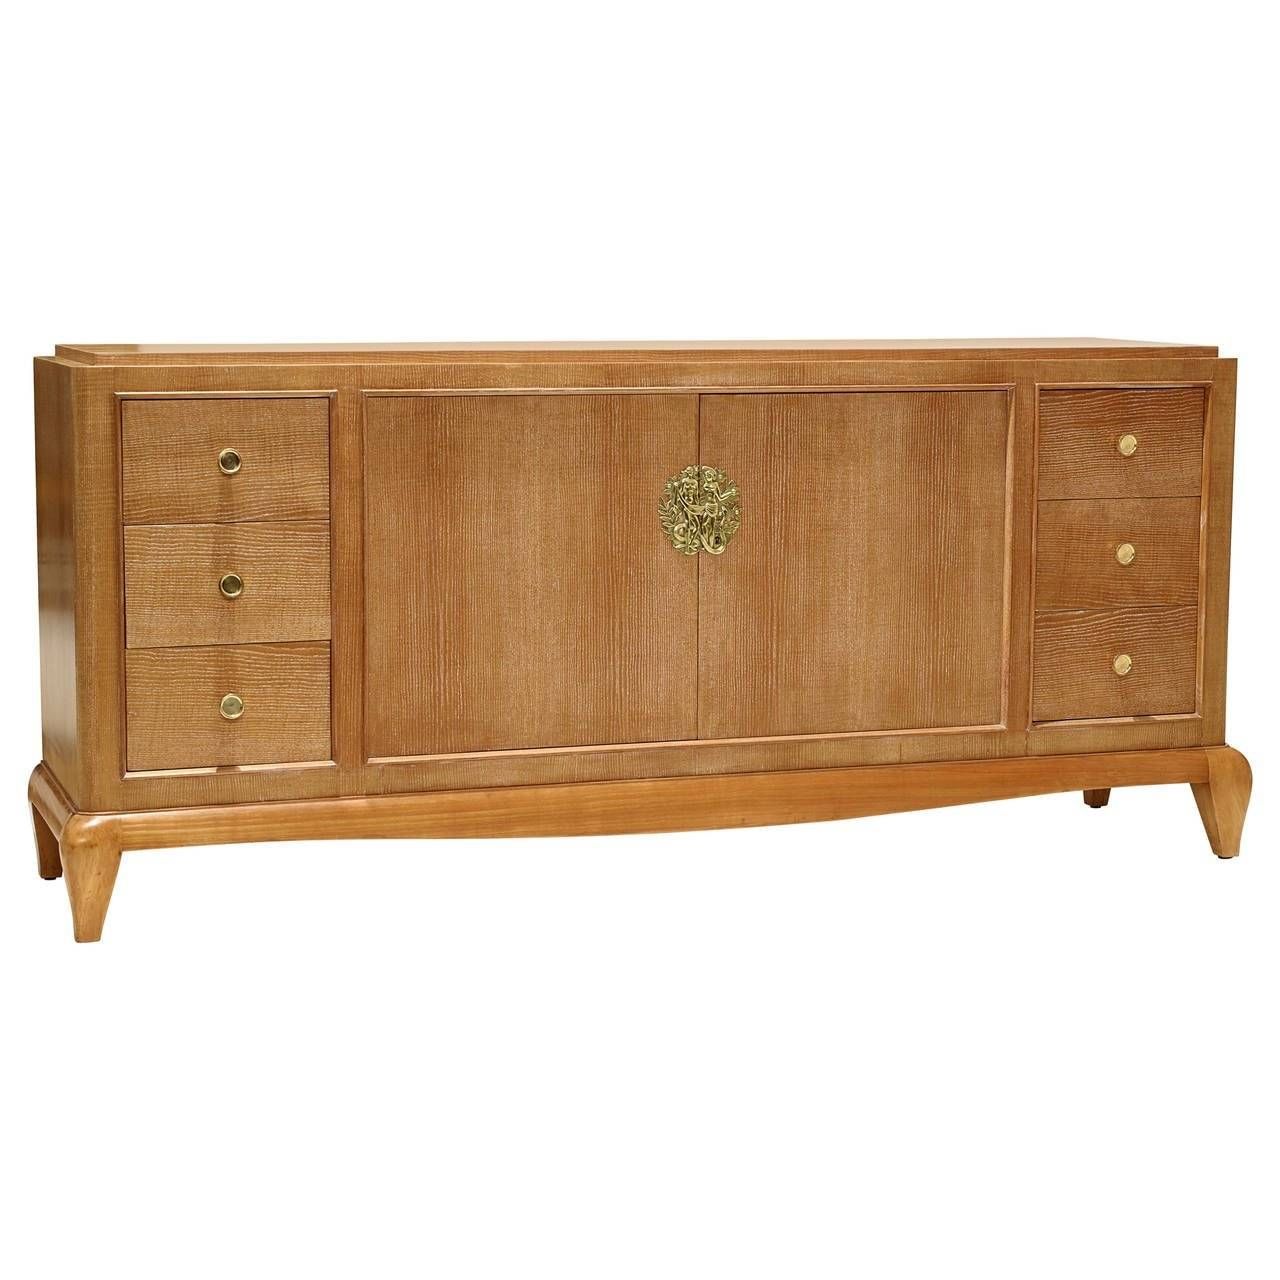 Sideboard In Limed Oak And Beechandré Arbus For Sale At 1stdibs Intended For Beech Sideboards (View 18 of 20)